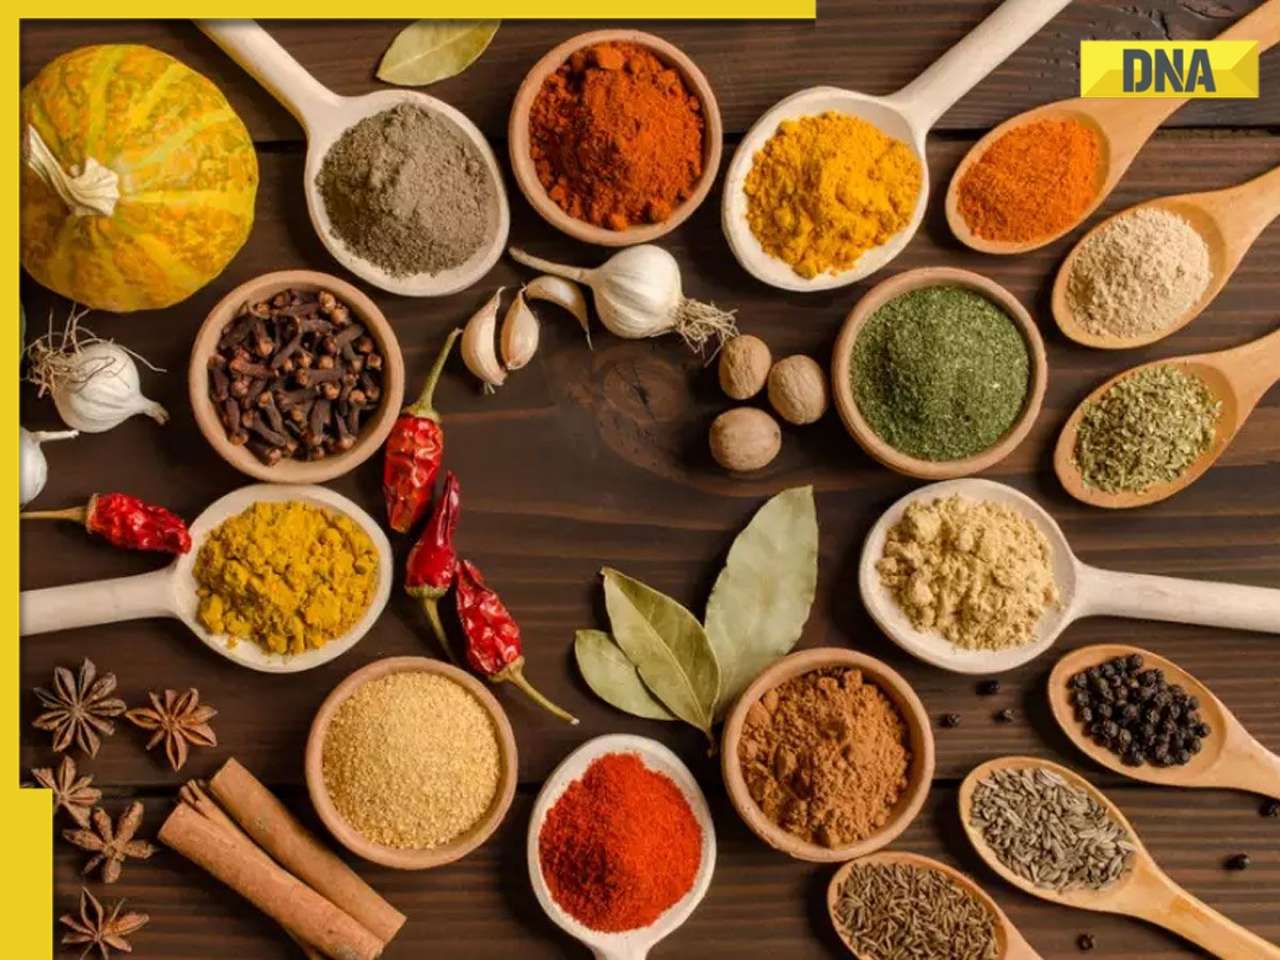 MDH, Everest masala row: US food regulator gathering information on Indian spices over alleged contamination